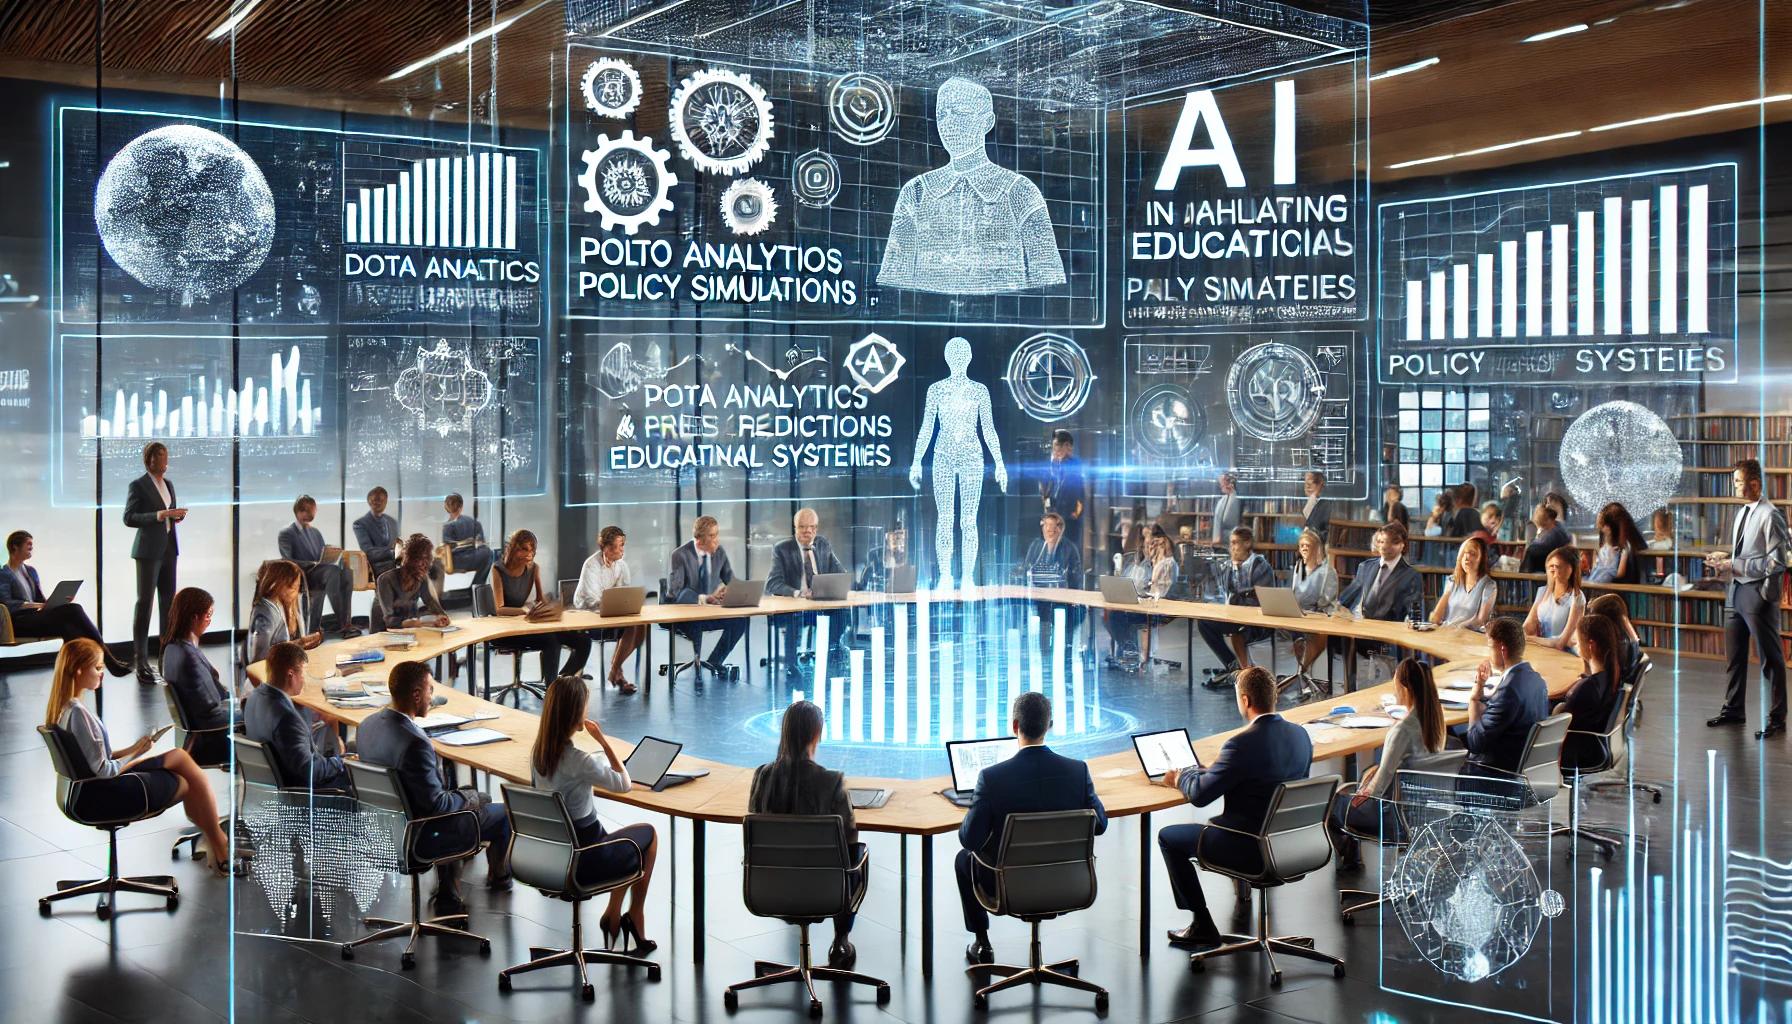 The Future of Learning: AI Educational Policies